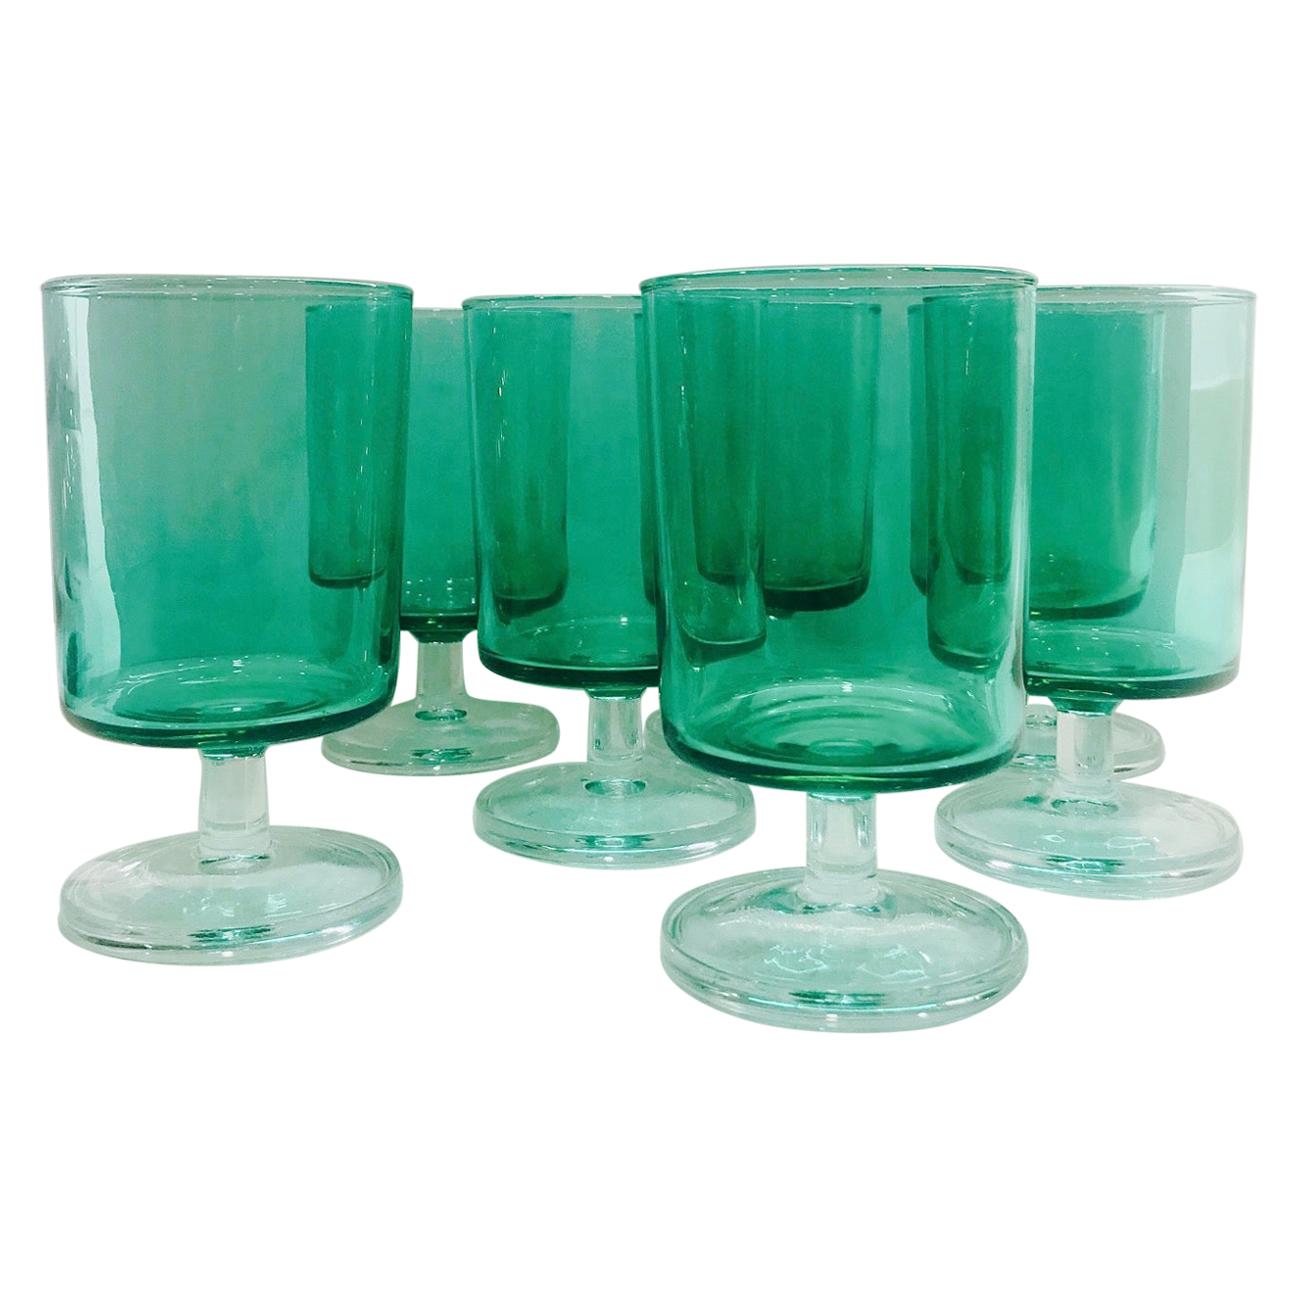 Set of 7 Mid-Century Modern French Crystal Wine Glasses in Emerald, 1960s